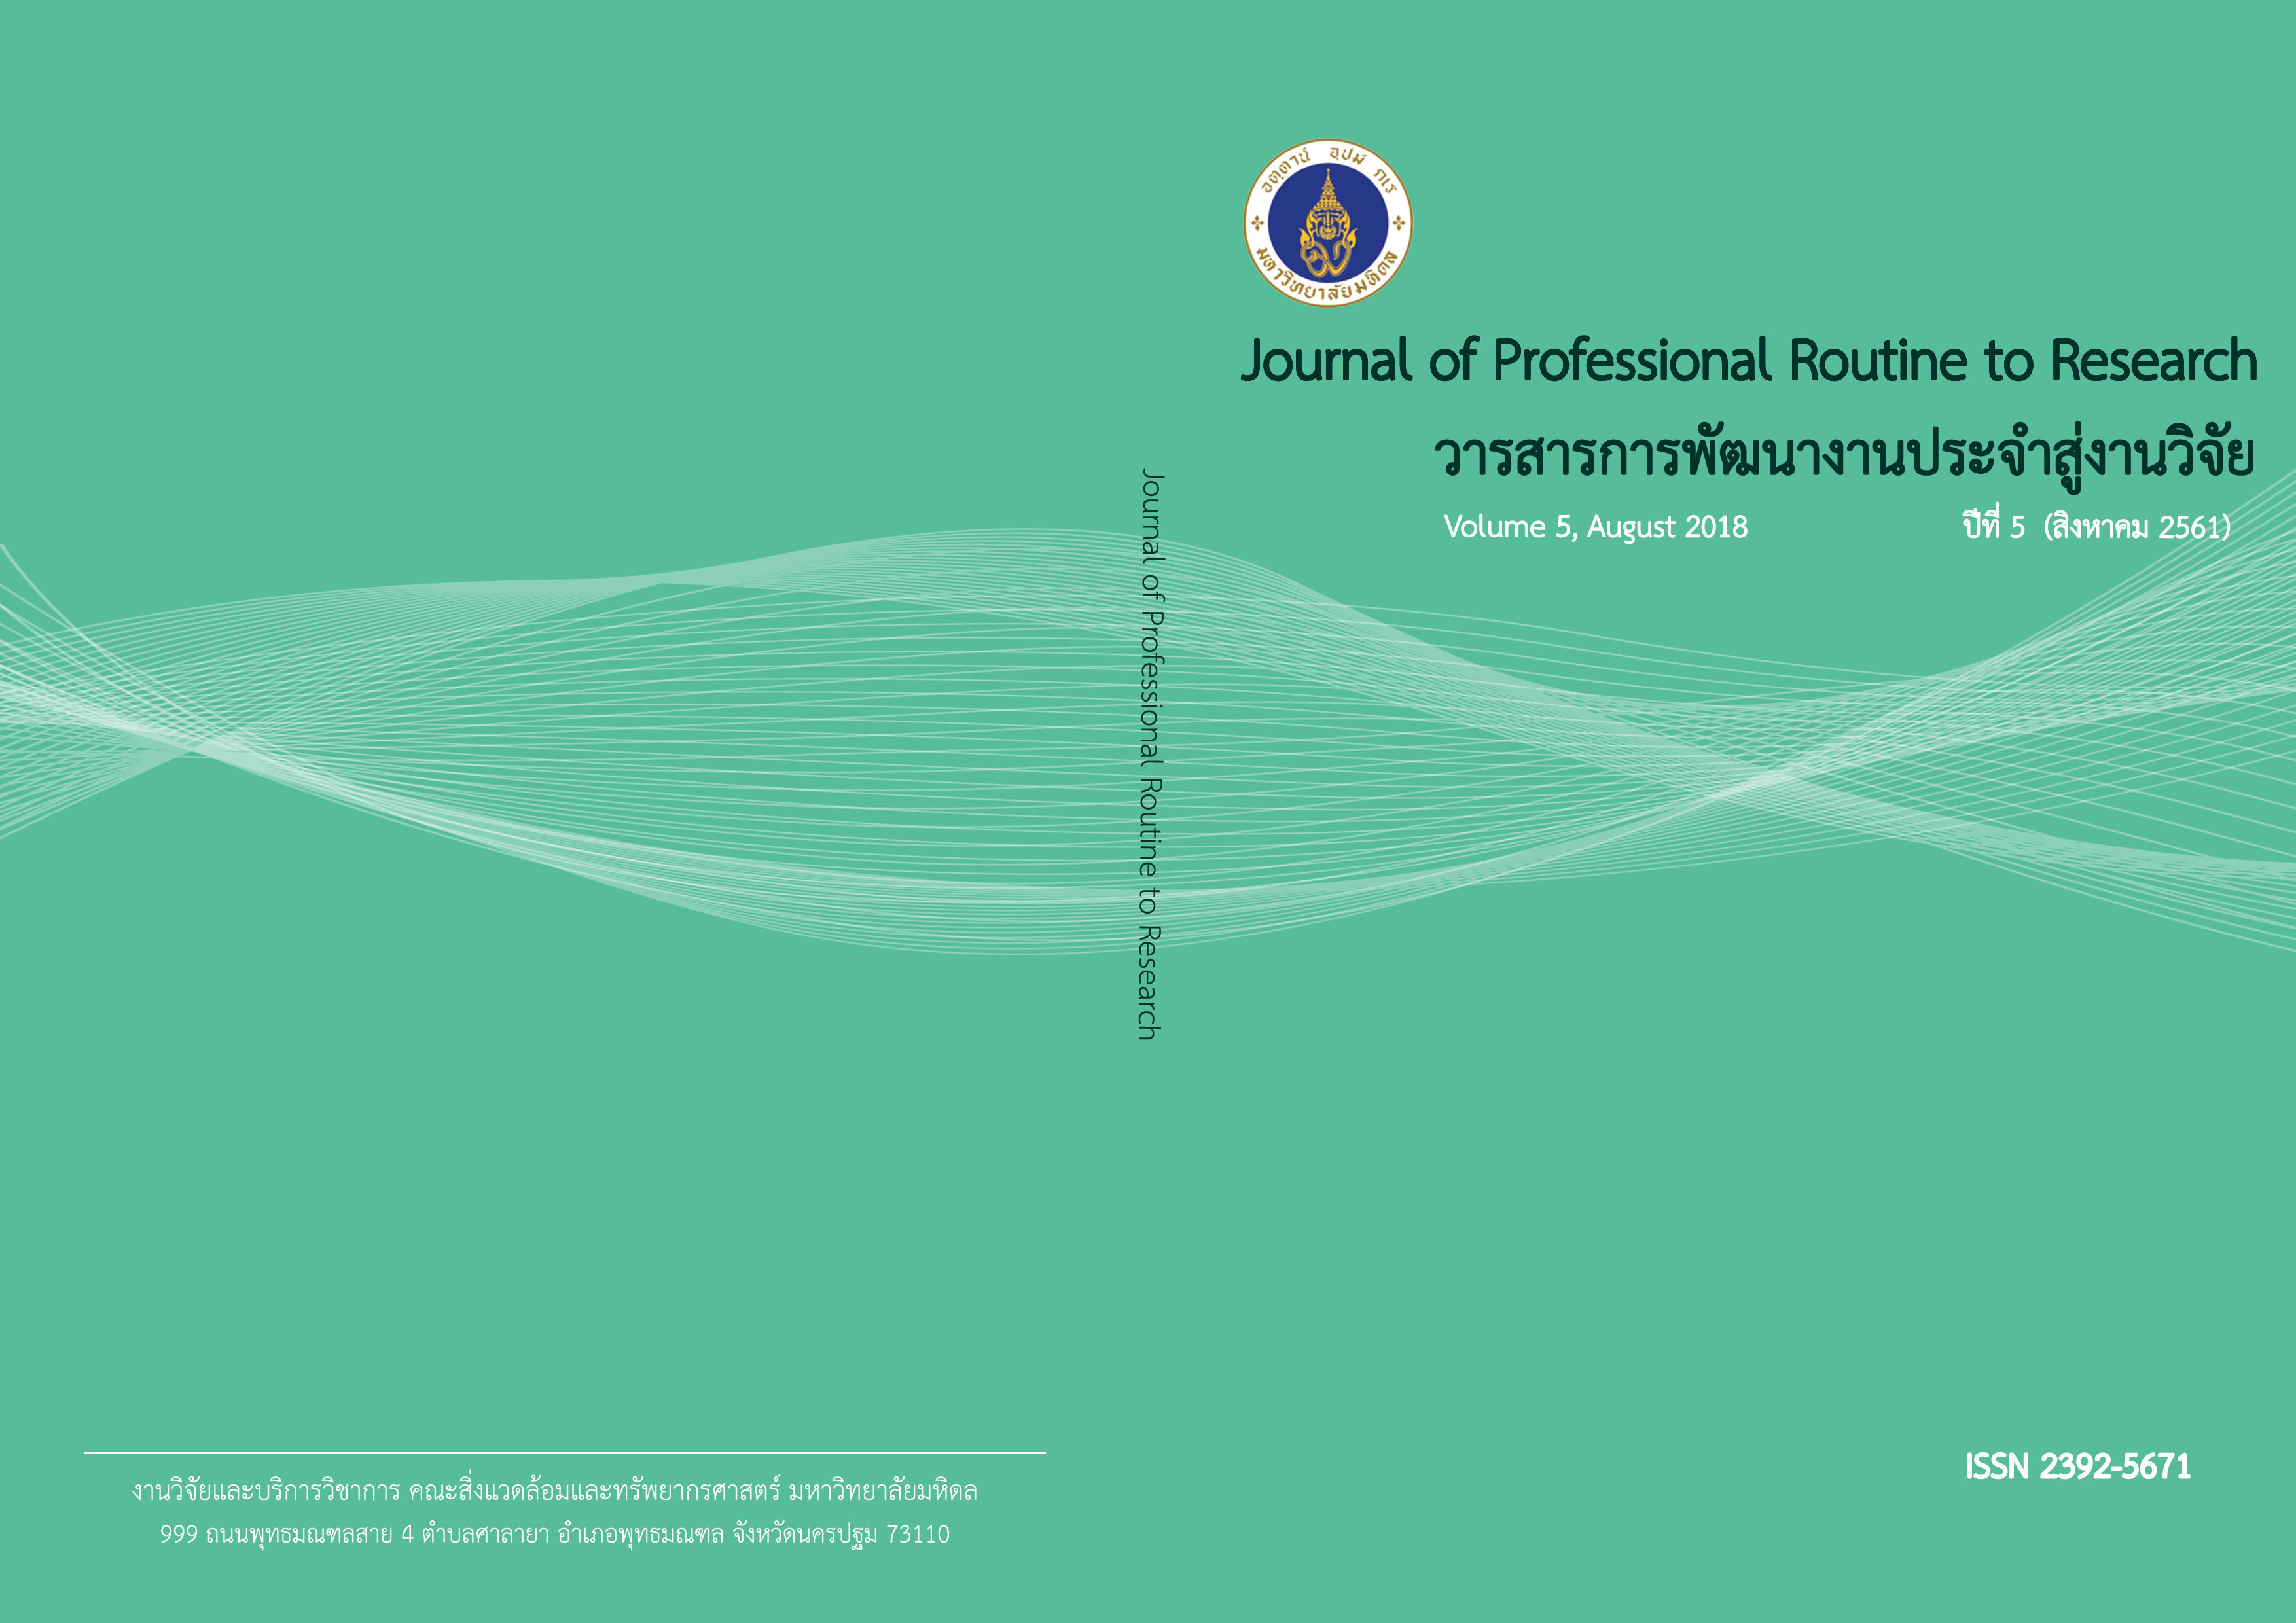 					View Vol. 5 (2018): Journal of Professional Routine to Research
				